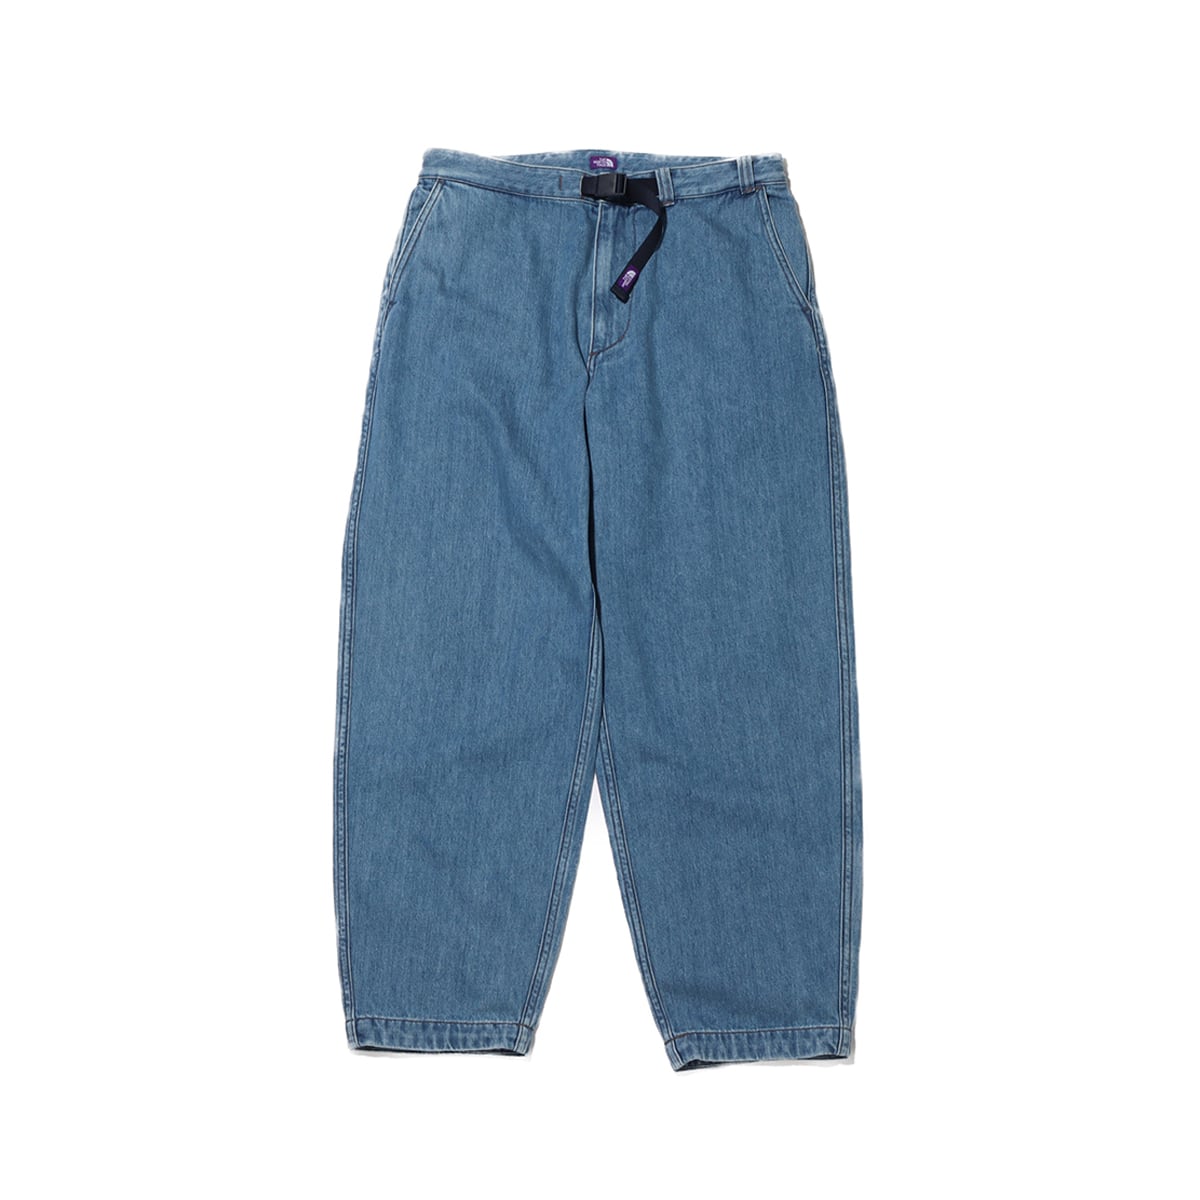 THE NORTH FACE PURPLE LABEL Denim Wide Tapered Field Pants Indigo 